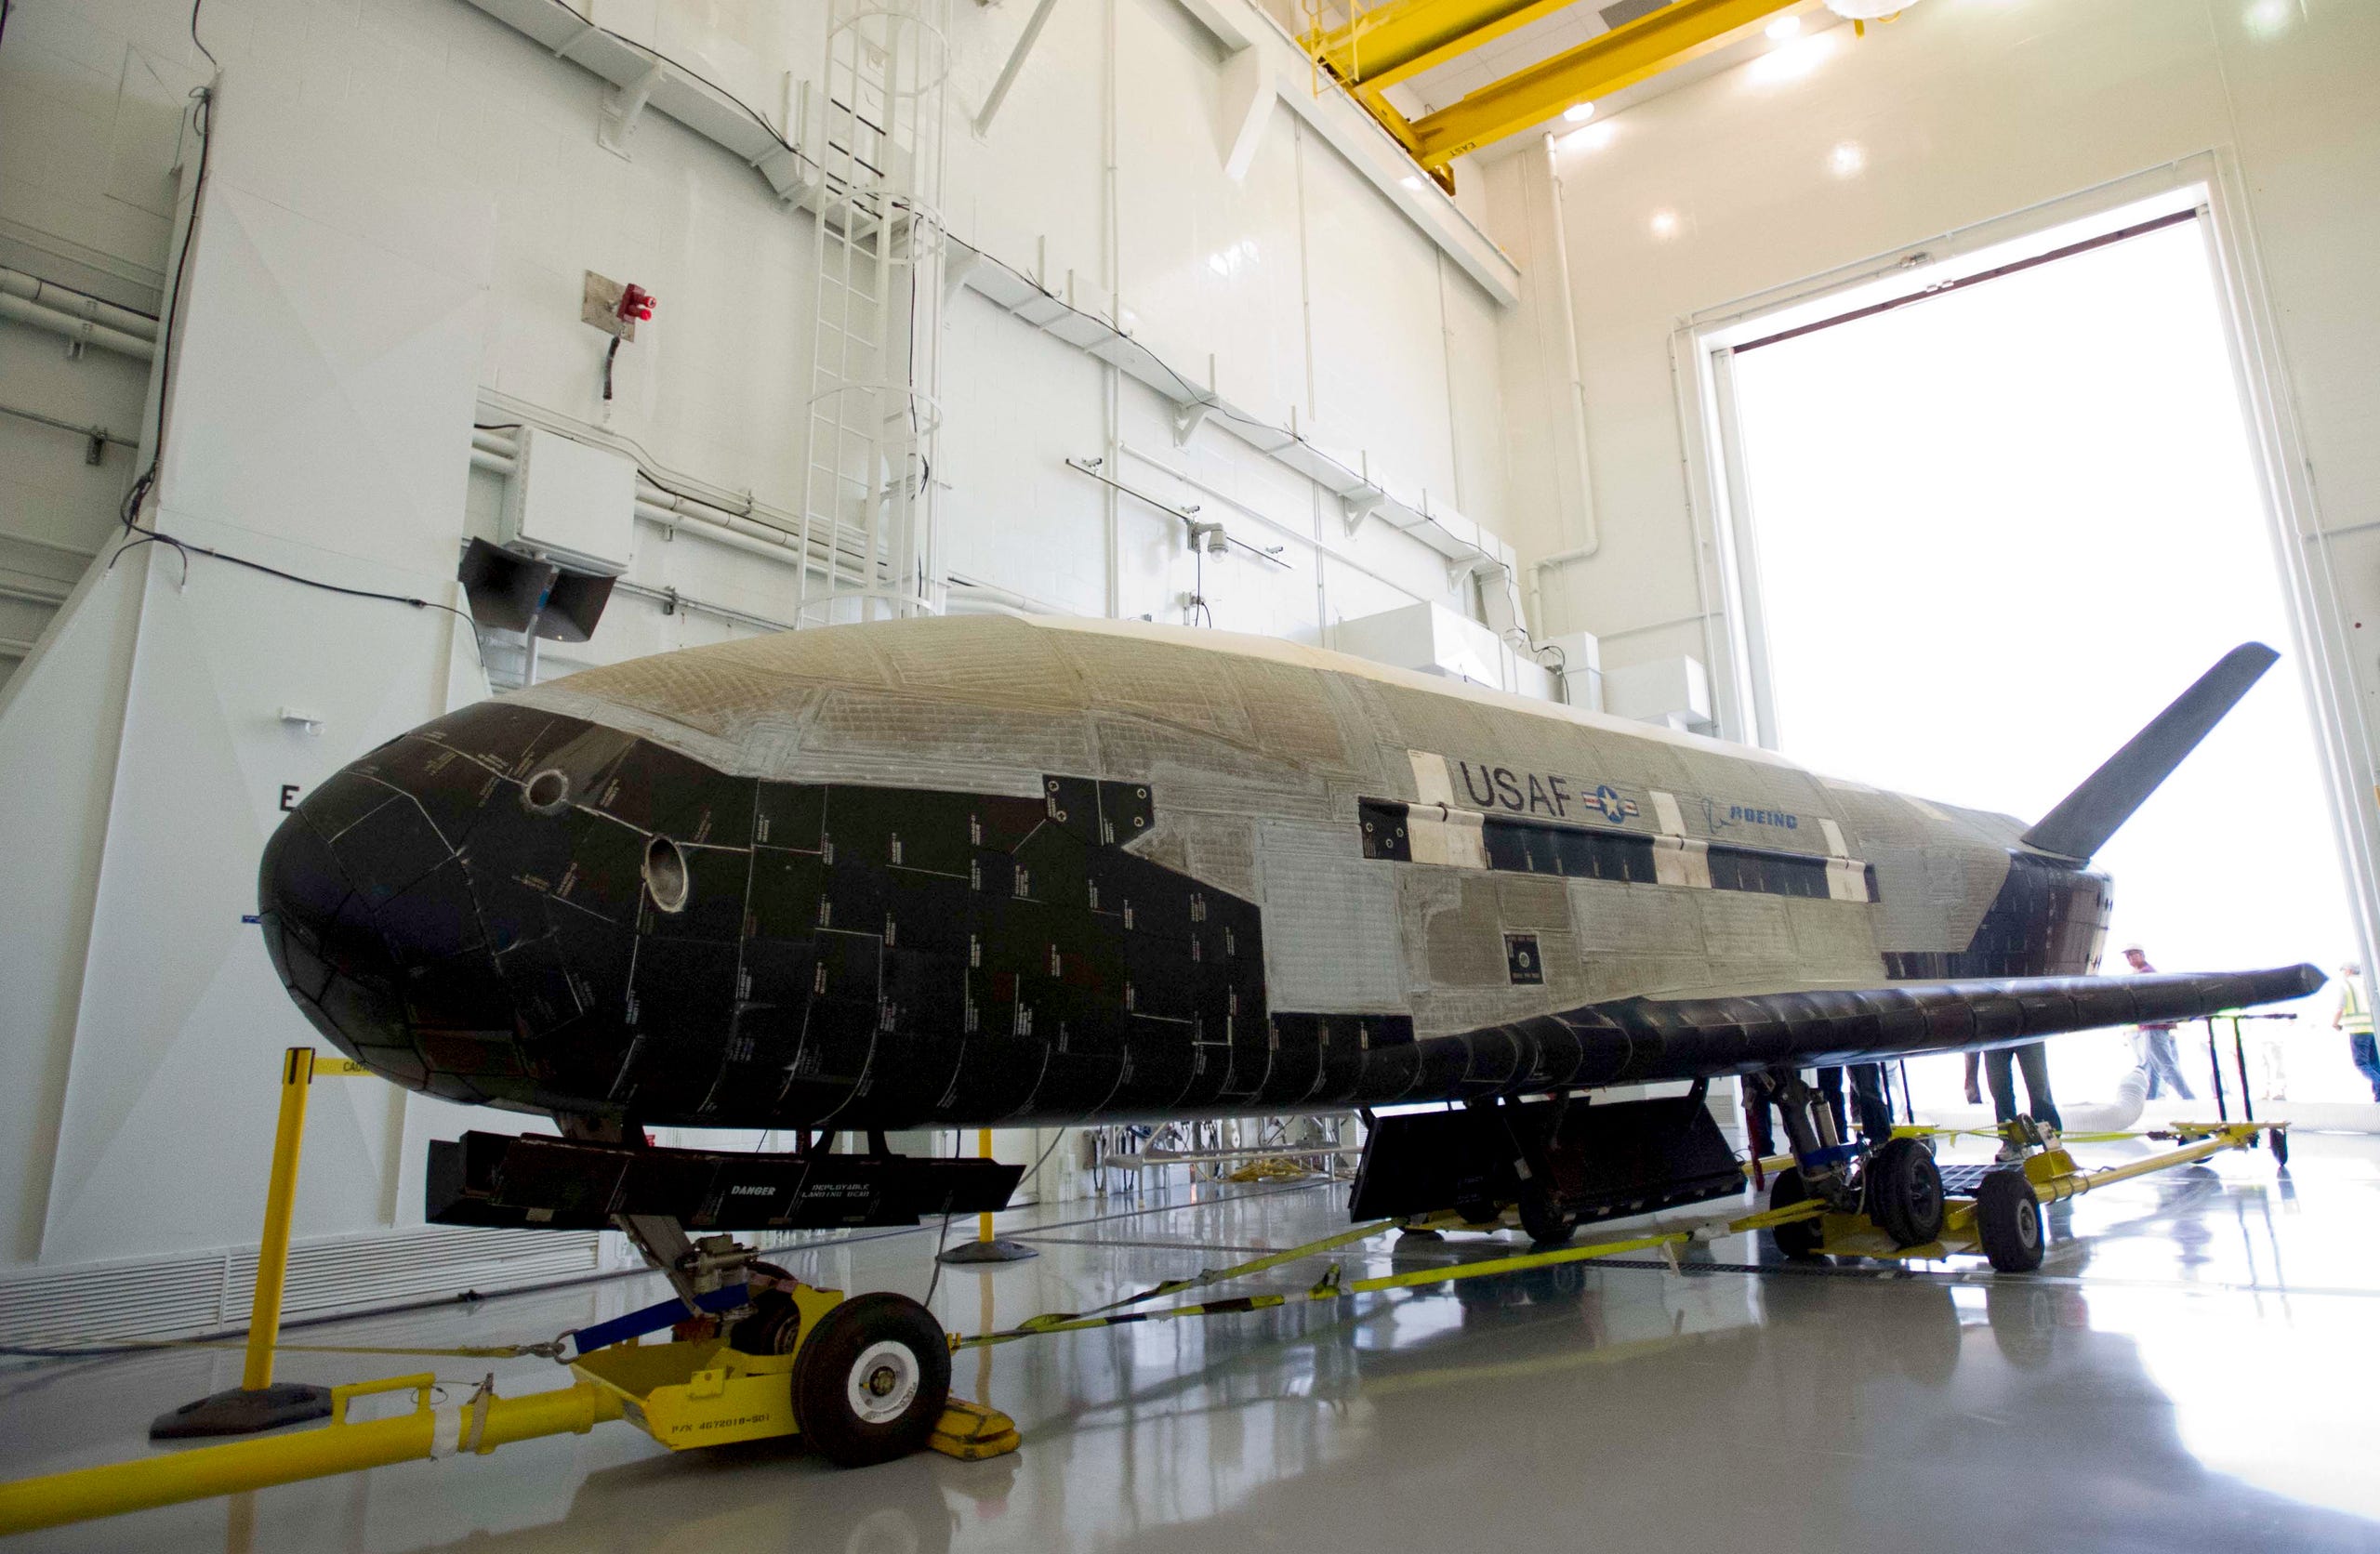 The X-37B Orbital Test Vehicle, the Air Force's unmanned, reusable space plane, at Vandenberg Air Force Base, Calif. on June 16, 2012.